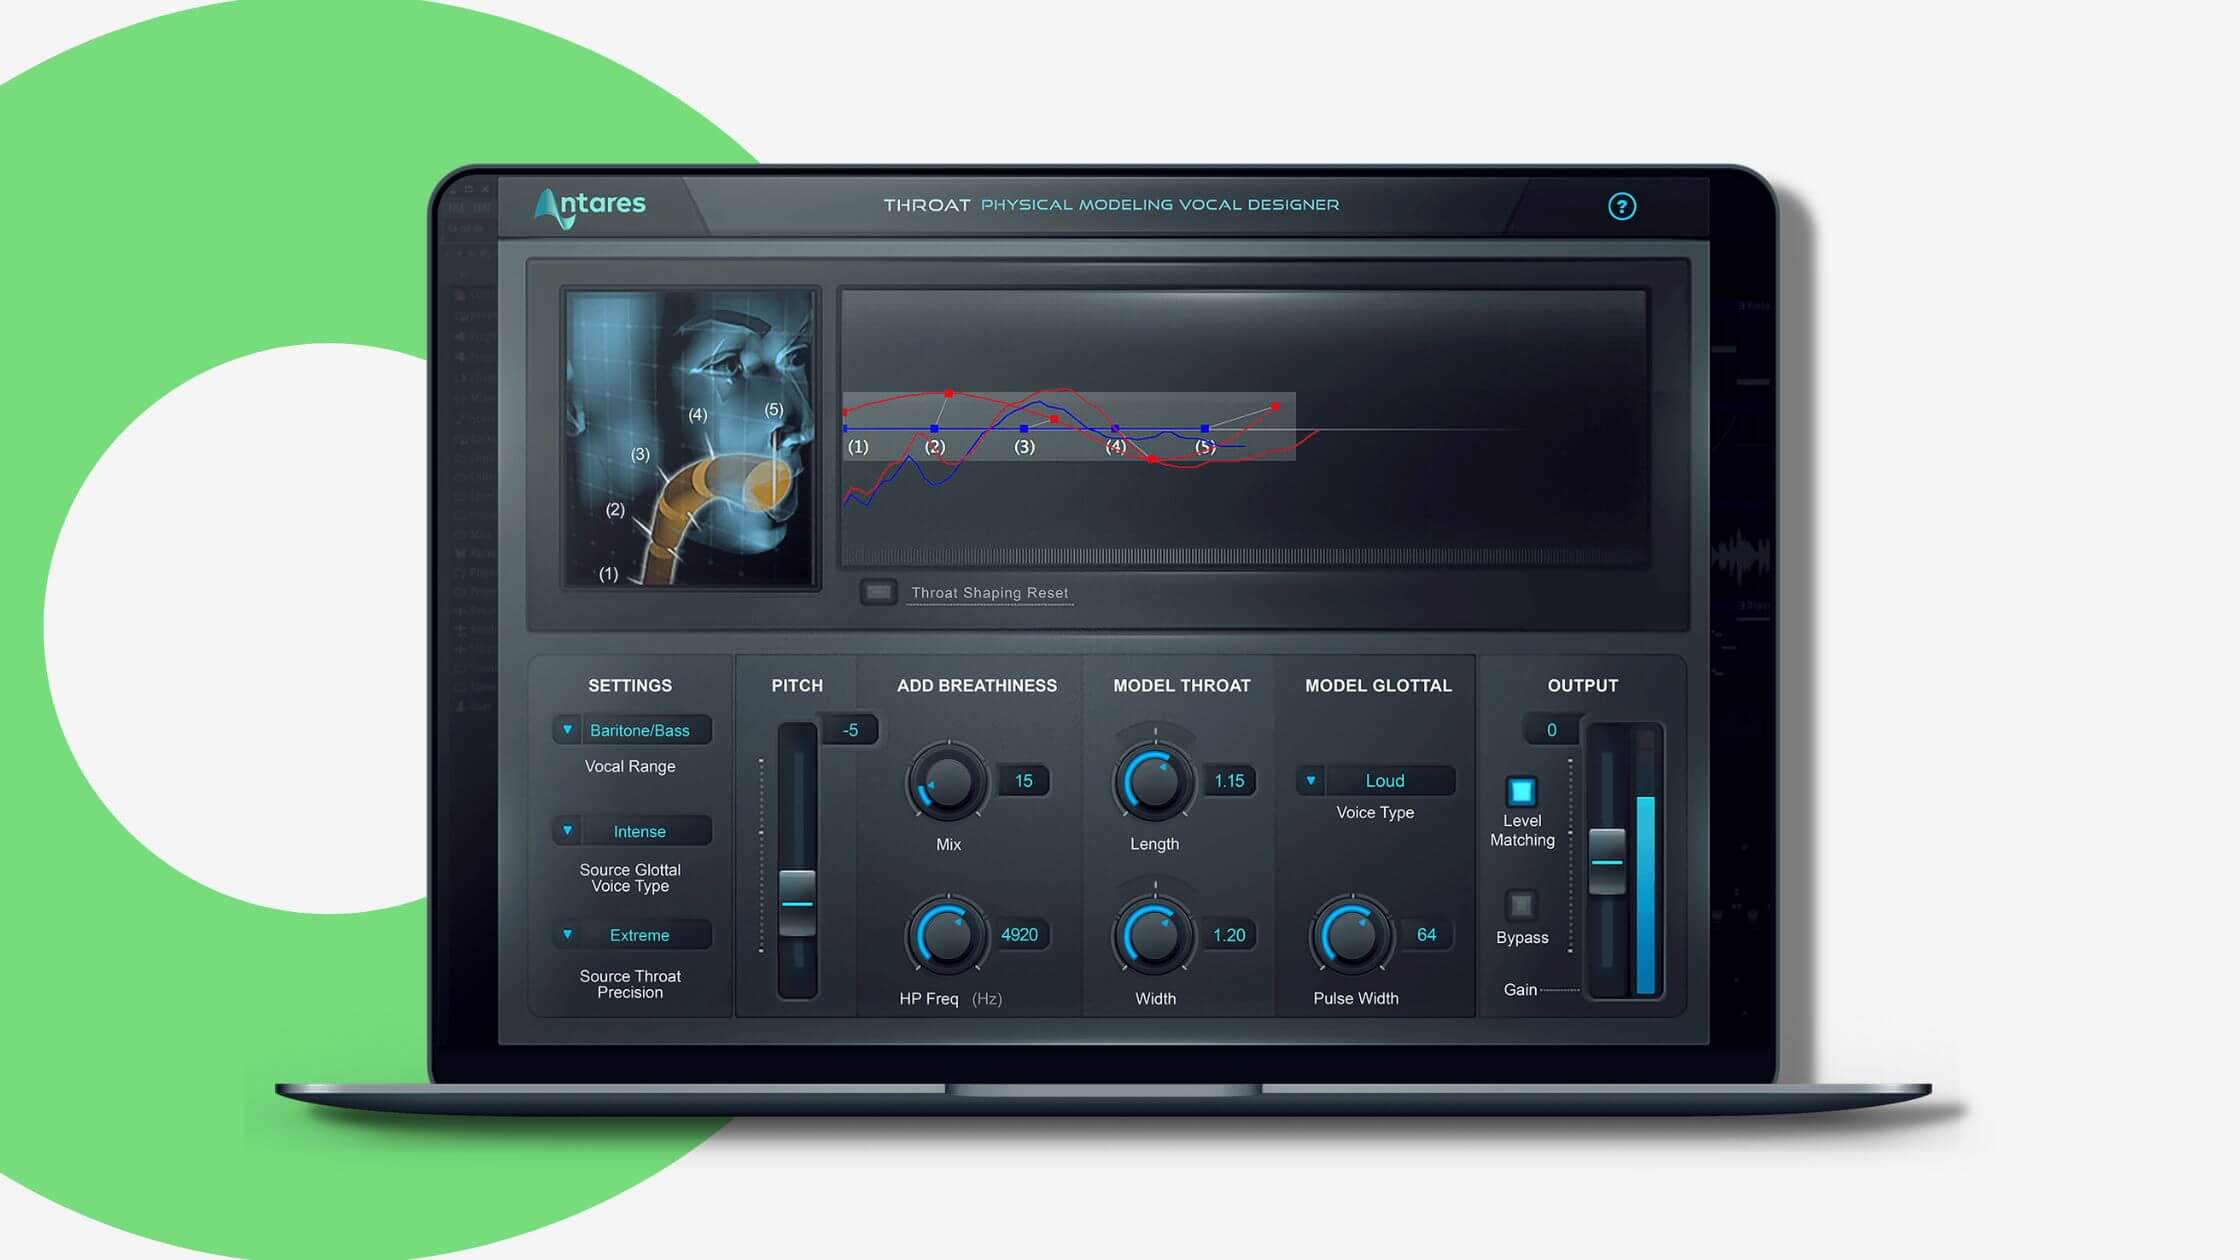 Get Antares Throat for free with a 14-Day Auto-Tune Unlimited trial